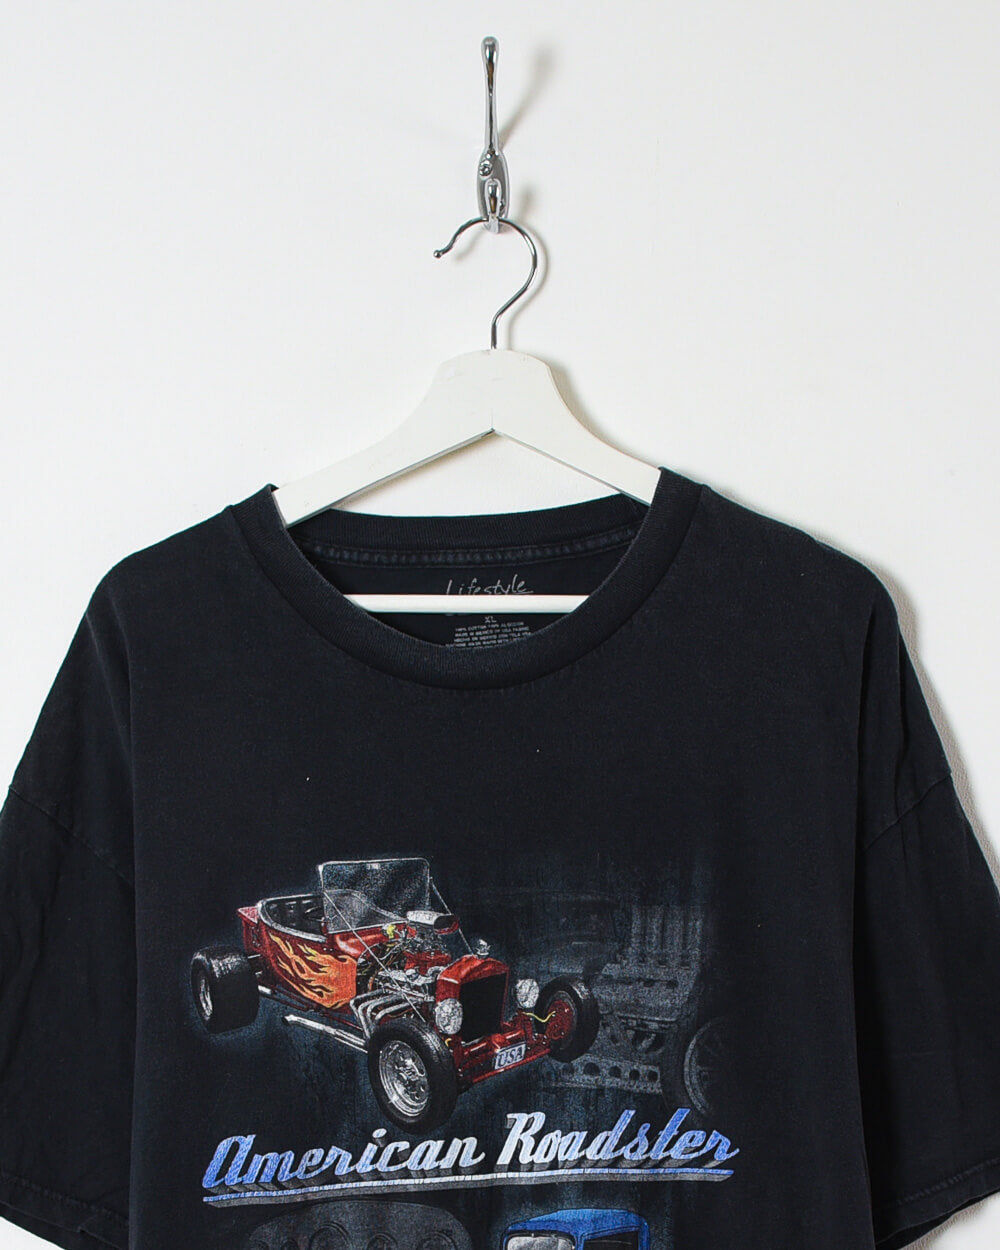 American Roadster T-Shirt - X-Large - Domno Vintage 90s, 80s, 00s Retro and Vintage Clothing 